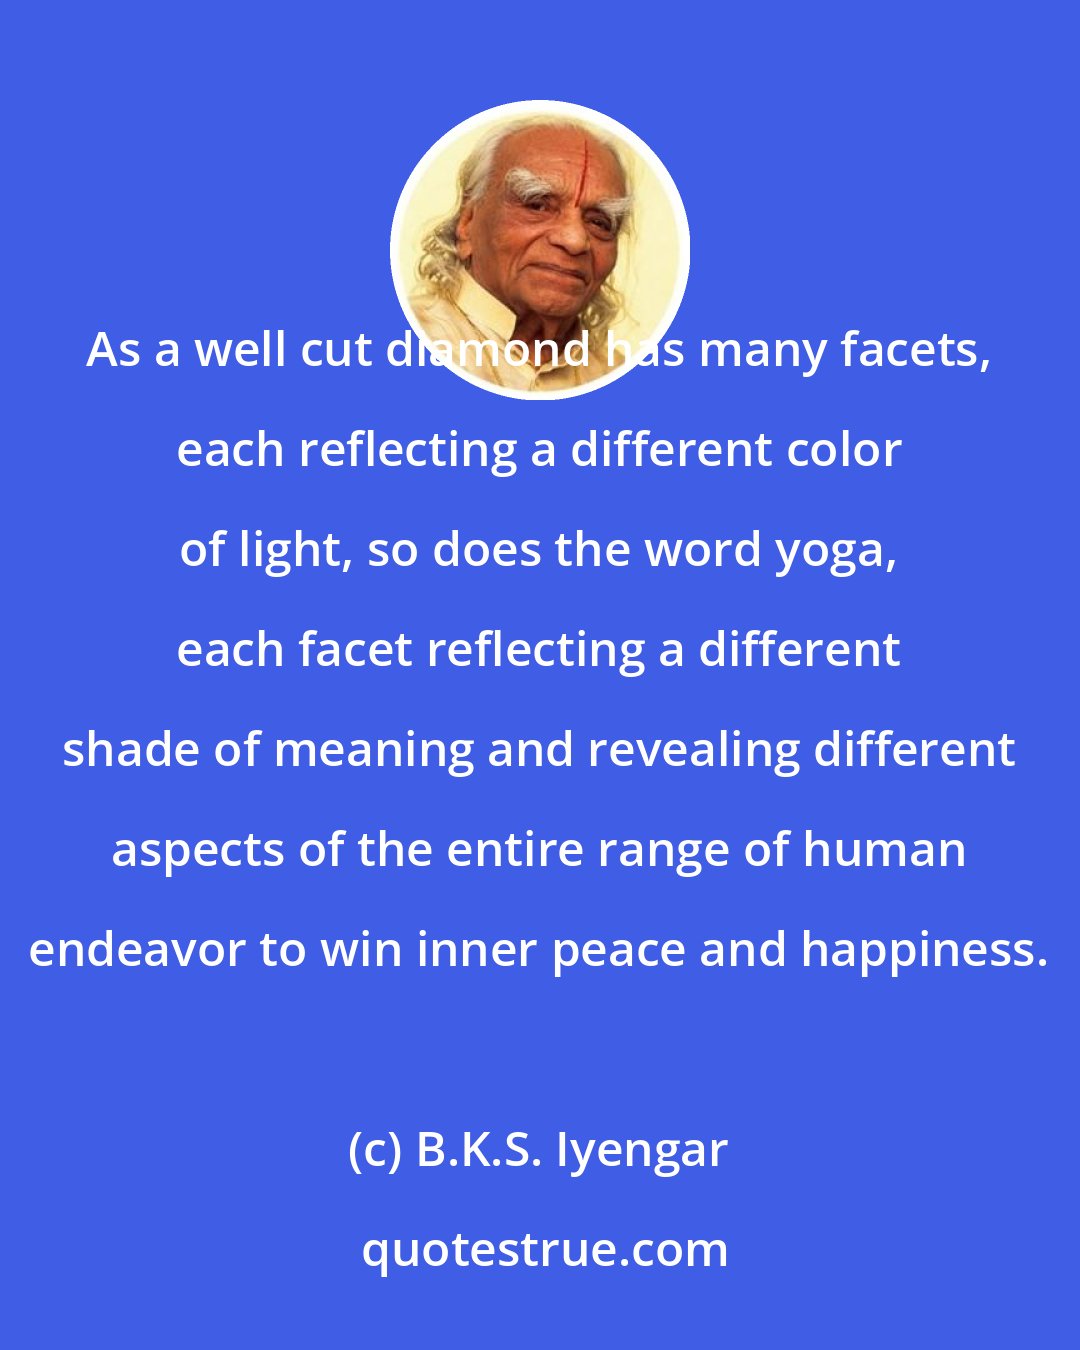 B.K.S. Iyengar: As a well cut diamond has many facets, each reflecting a different color of light, so does the word yoga, each facet reflecting a different shade of meaning and revealing different aspects of the entire range of human endeavor to win inner peace and happiness.